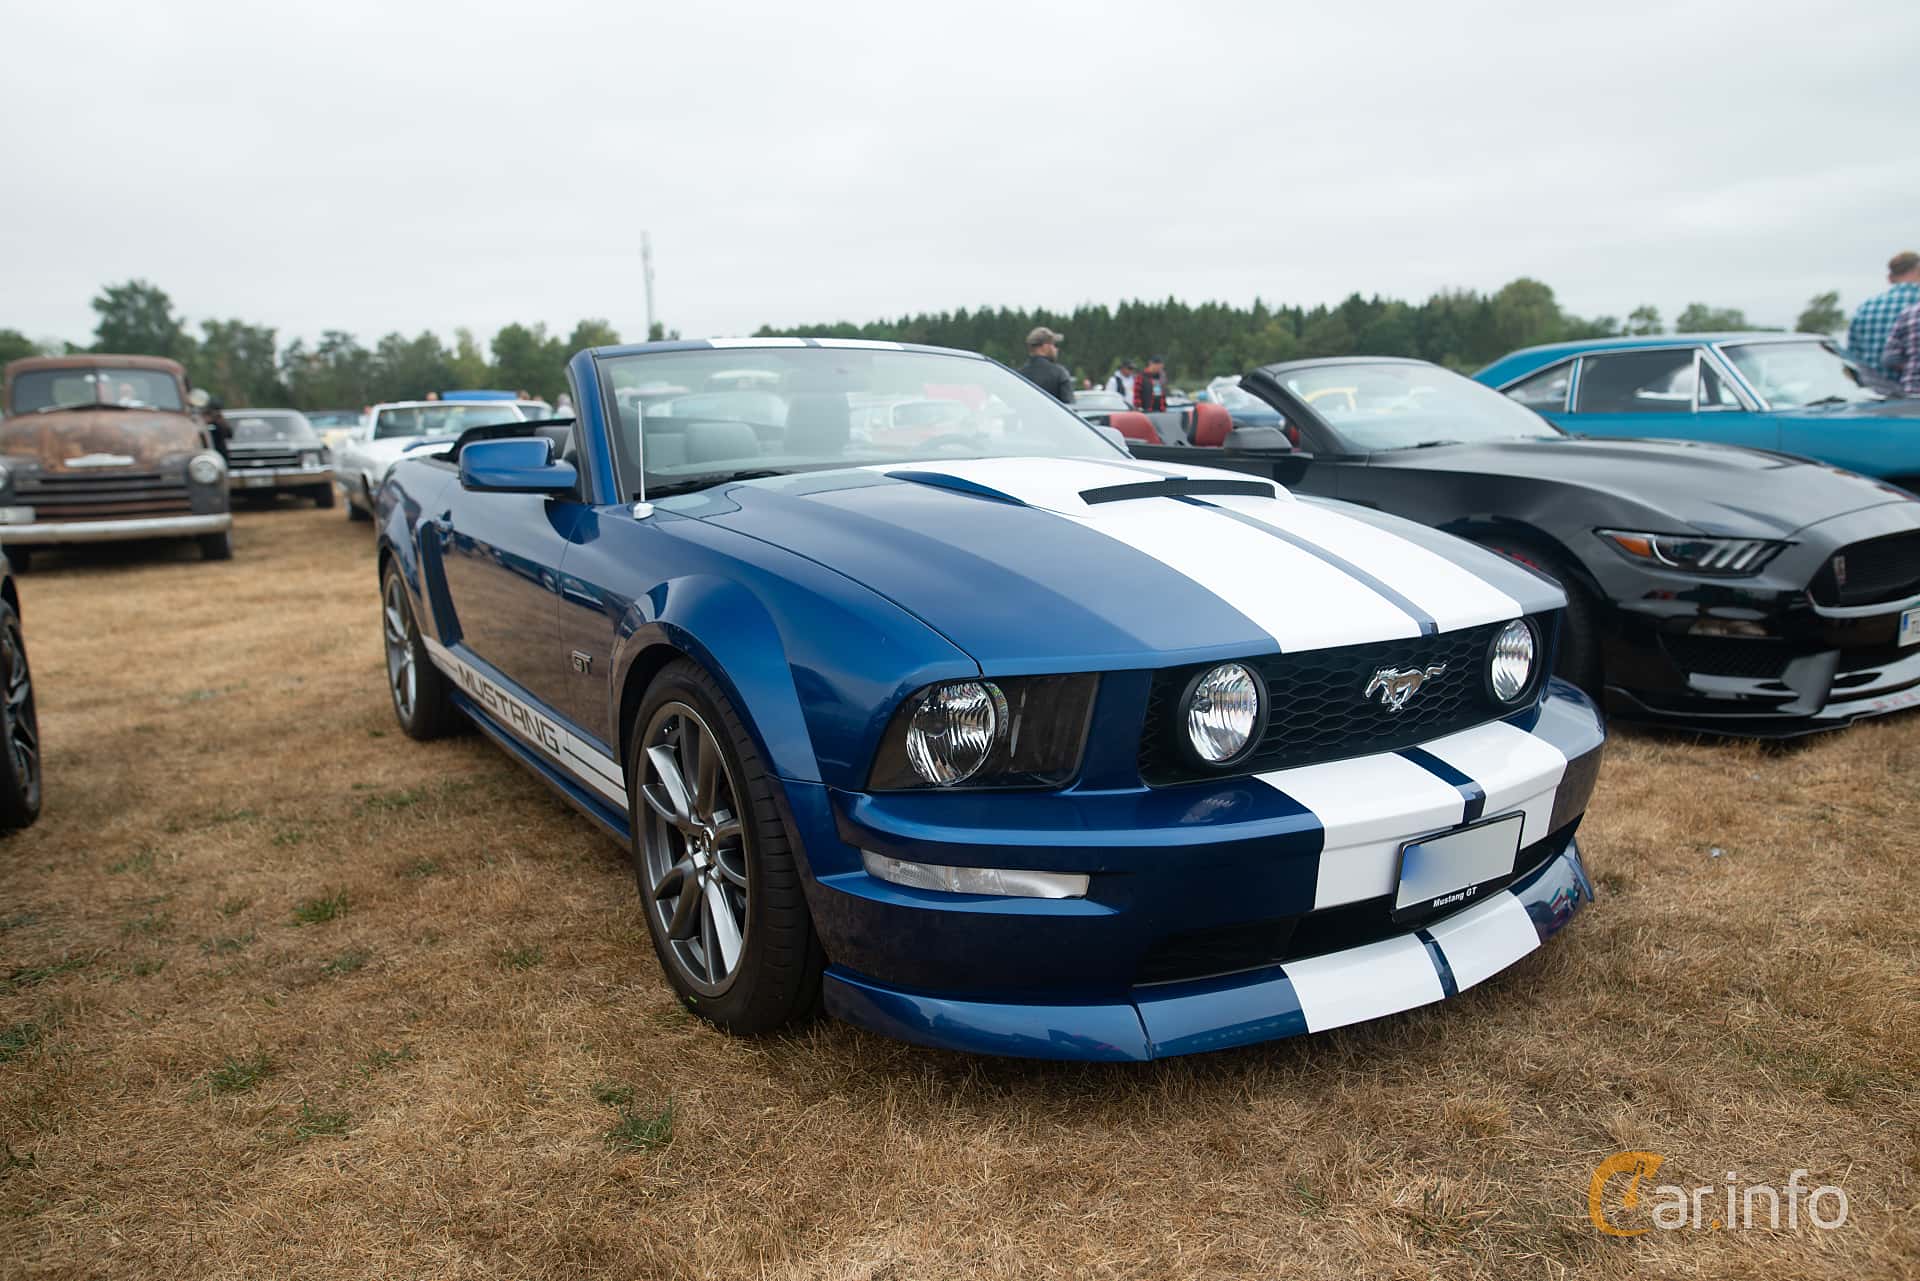 4 Images Of Ford Mustang Gt Convertible Automatic 304hp 2006 By Johanb